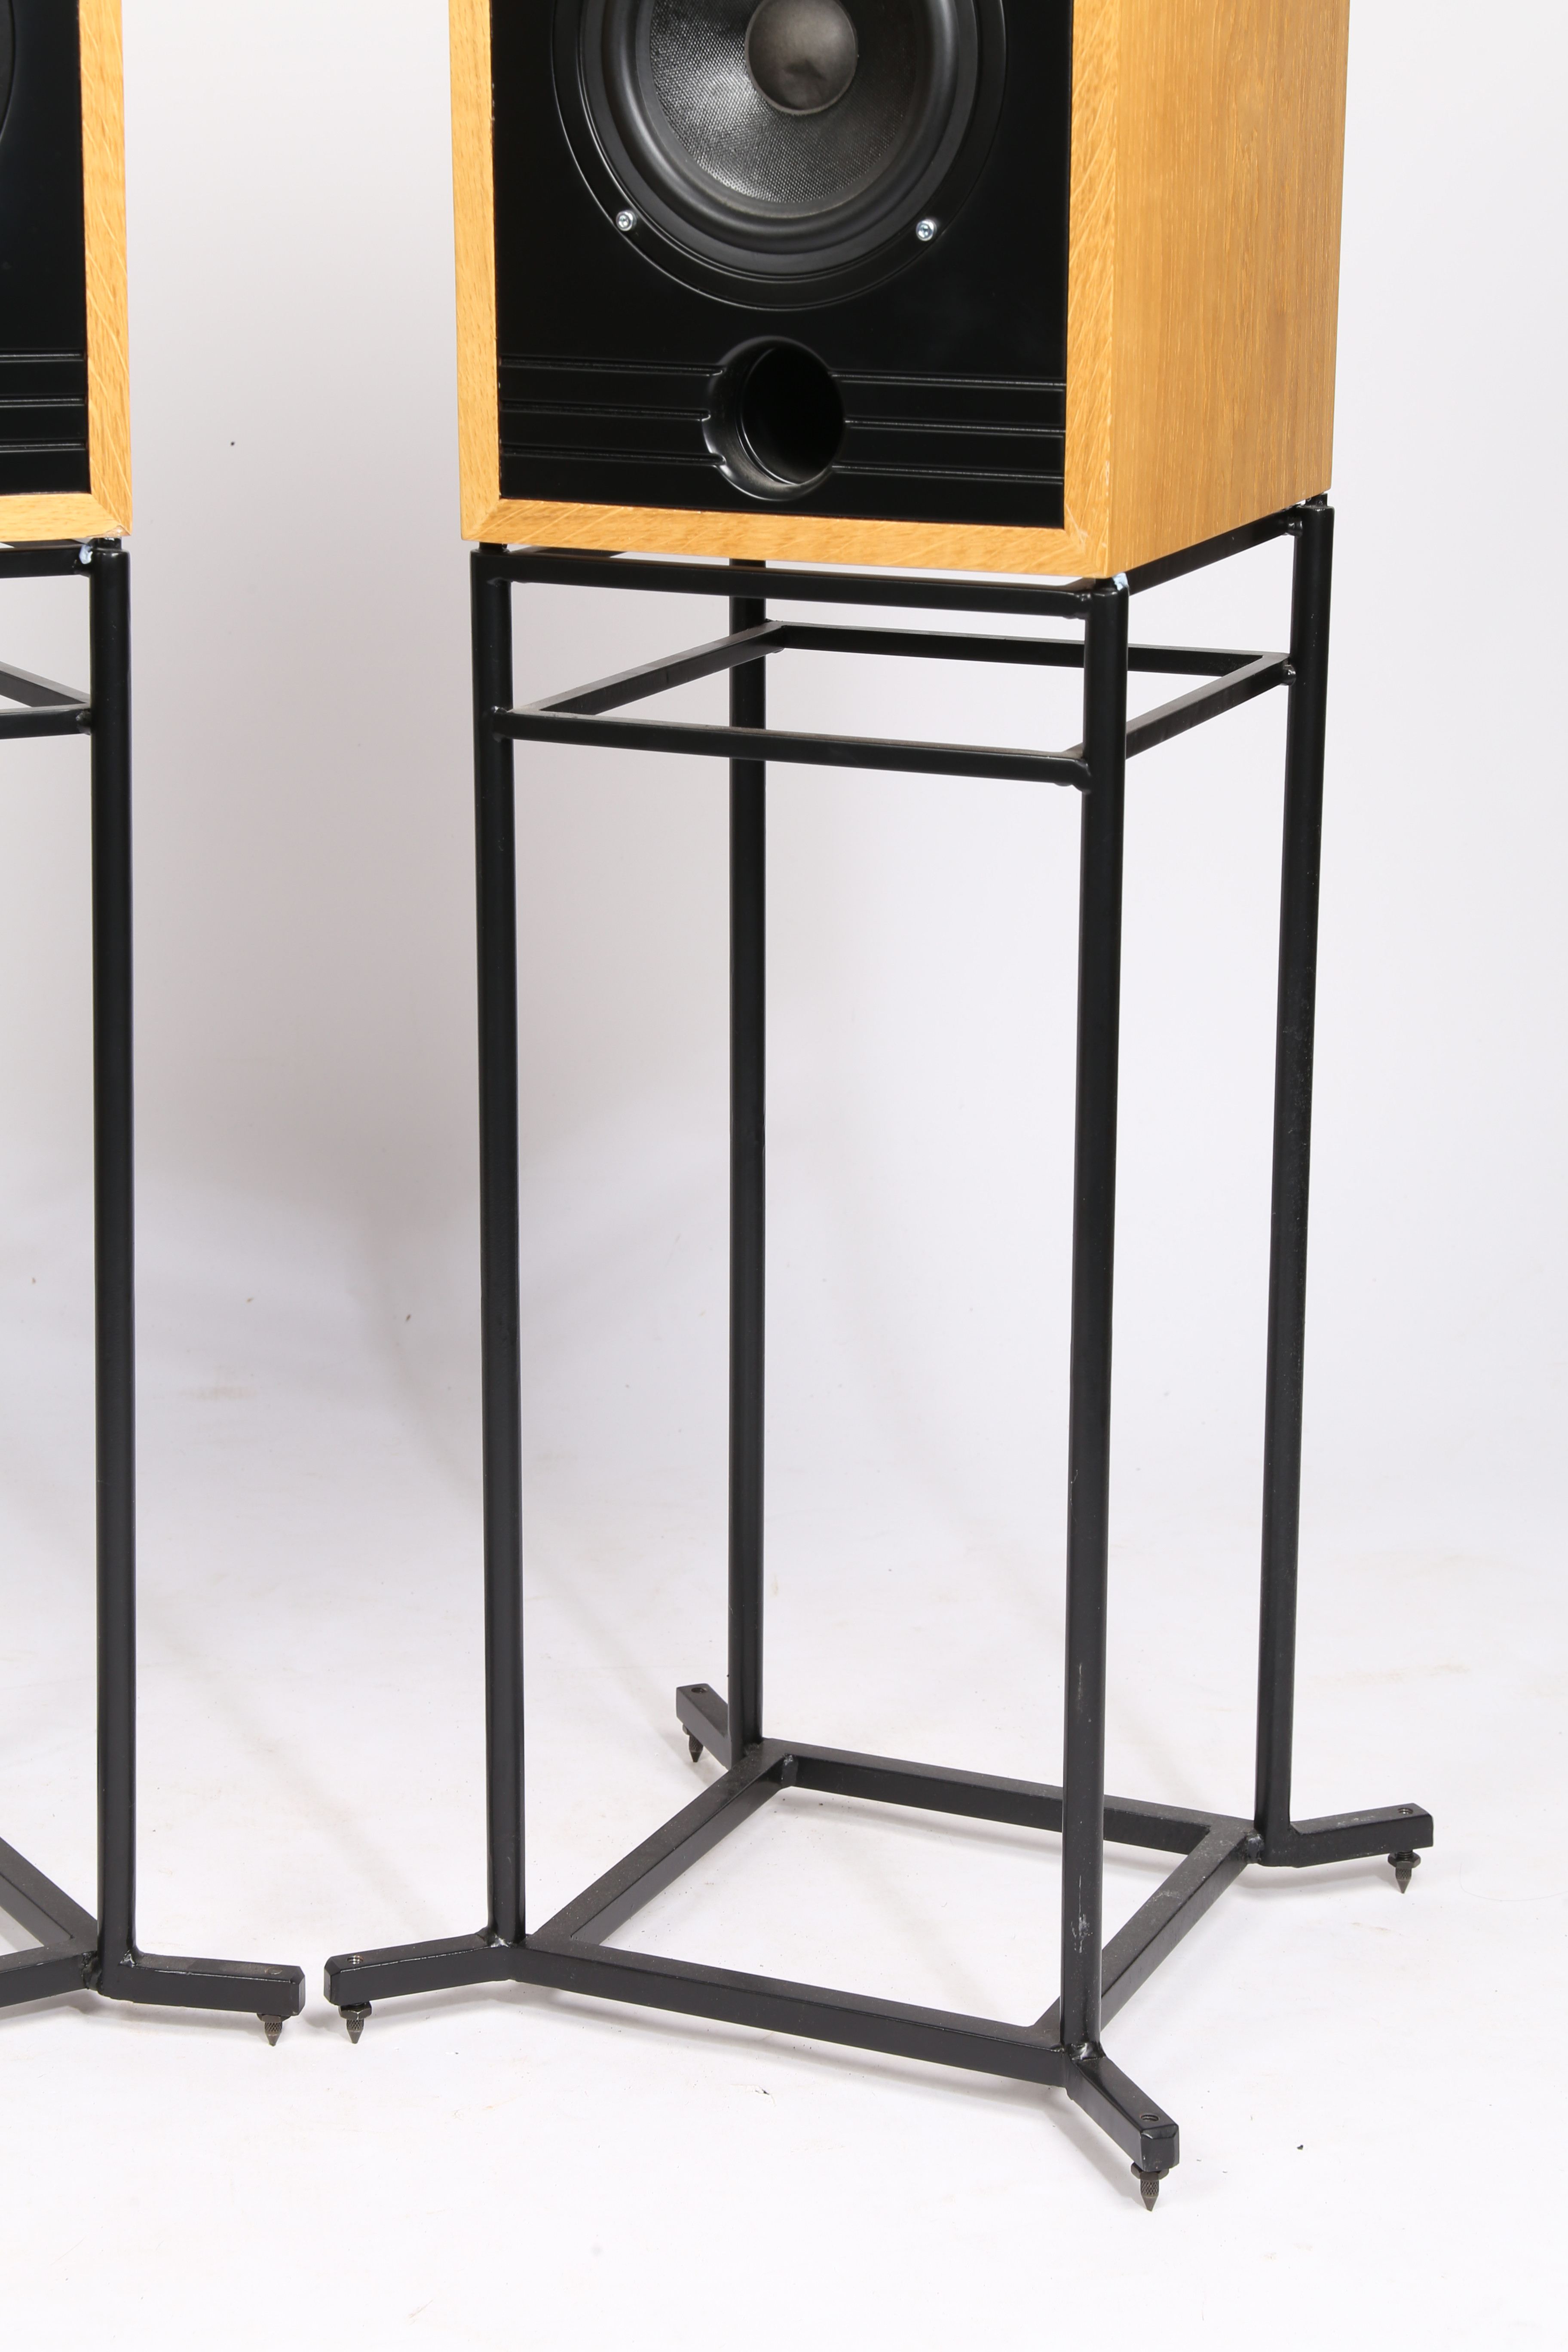 A PAIR OF RUSSELL K RED 100 SPEAKERS AND STANDS (4). - Image 6 of 8